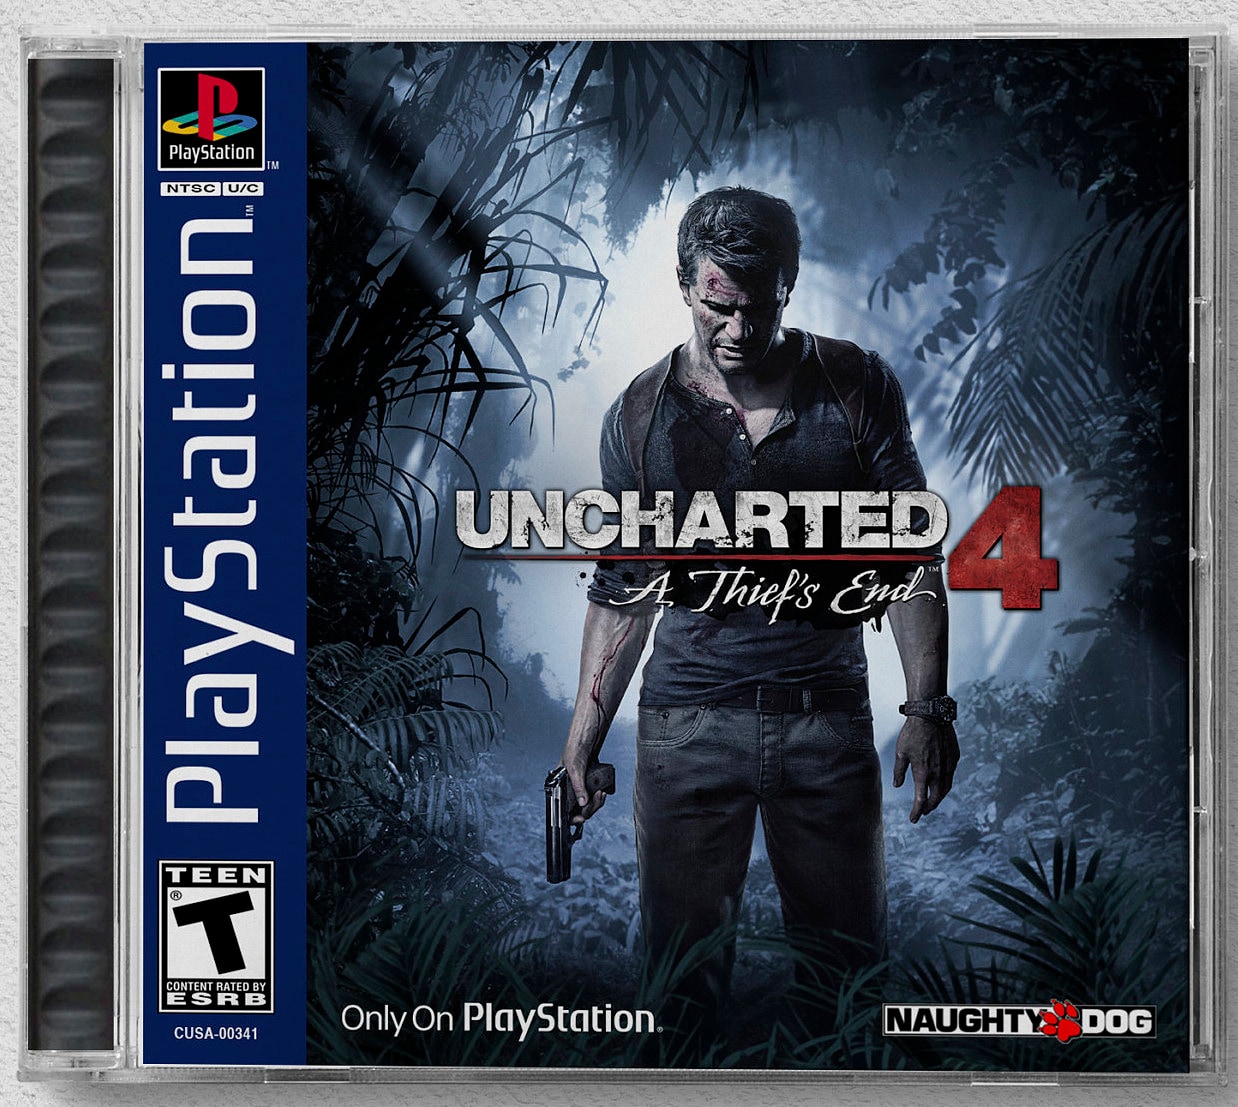 Image] Happy 3 year anniversary to Uncharted 4: A Thief's End, one of  PlayStation's best games of all time! : r/PS4